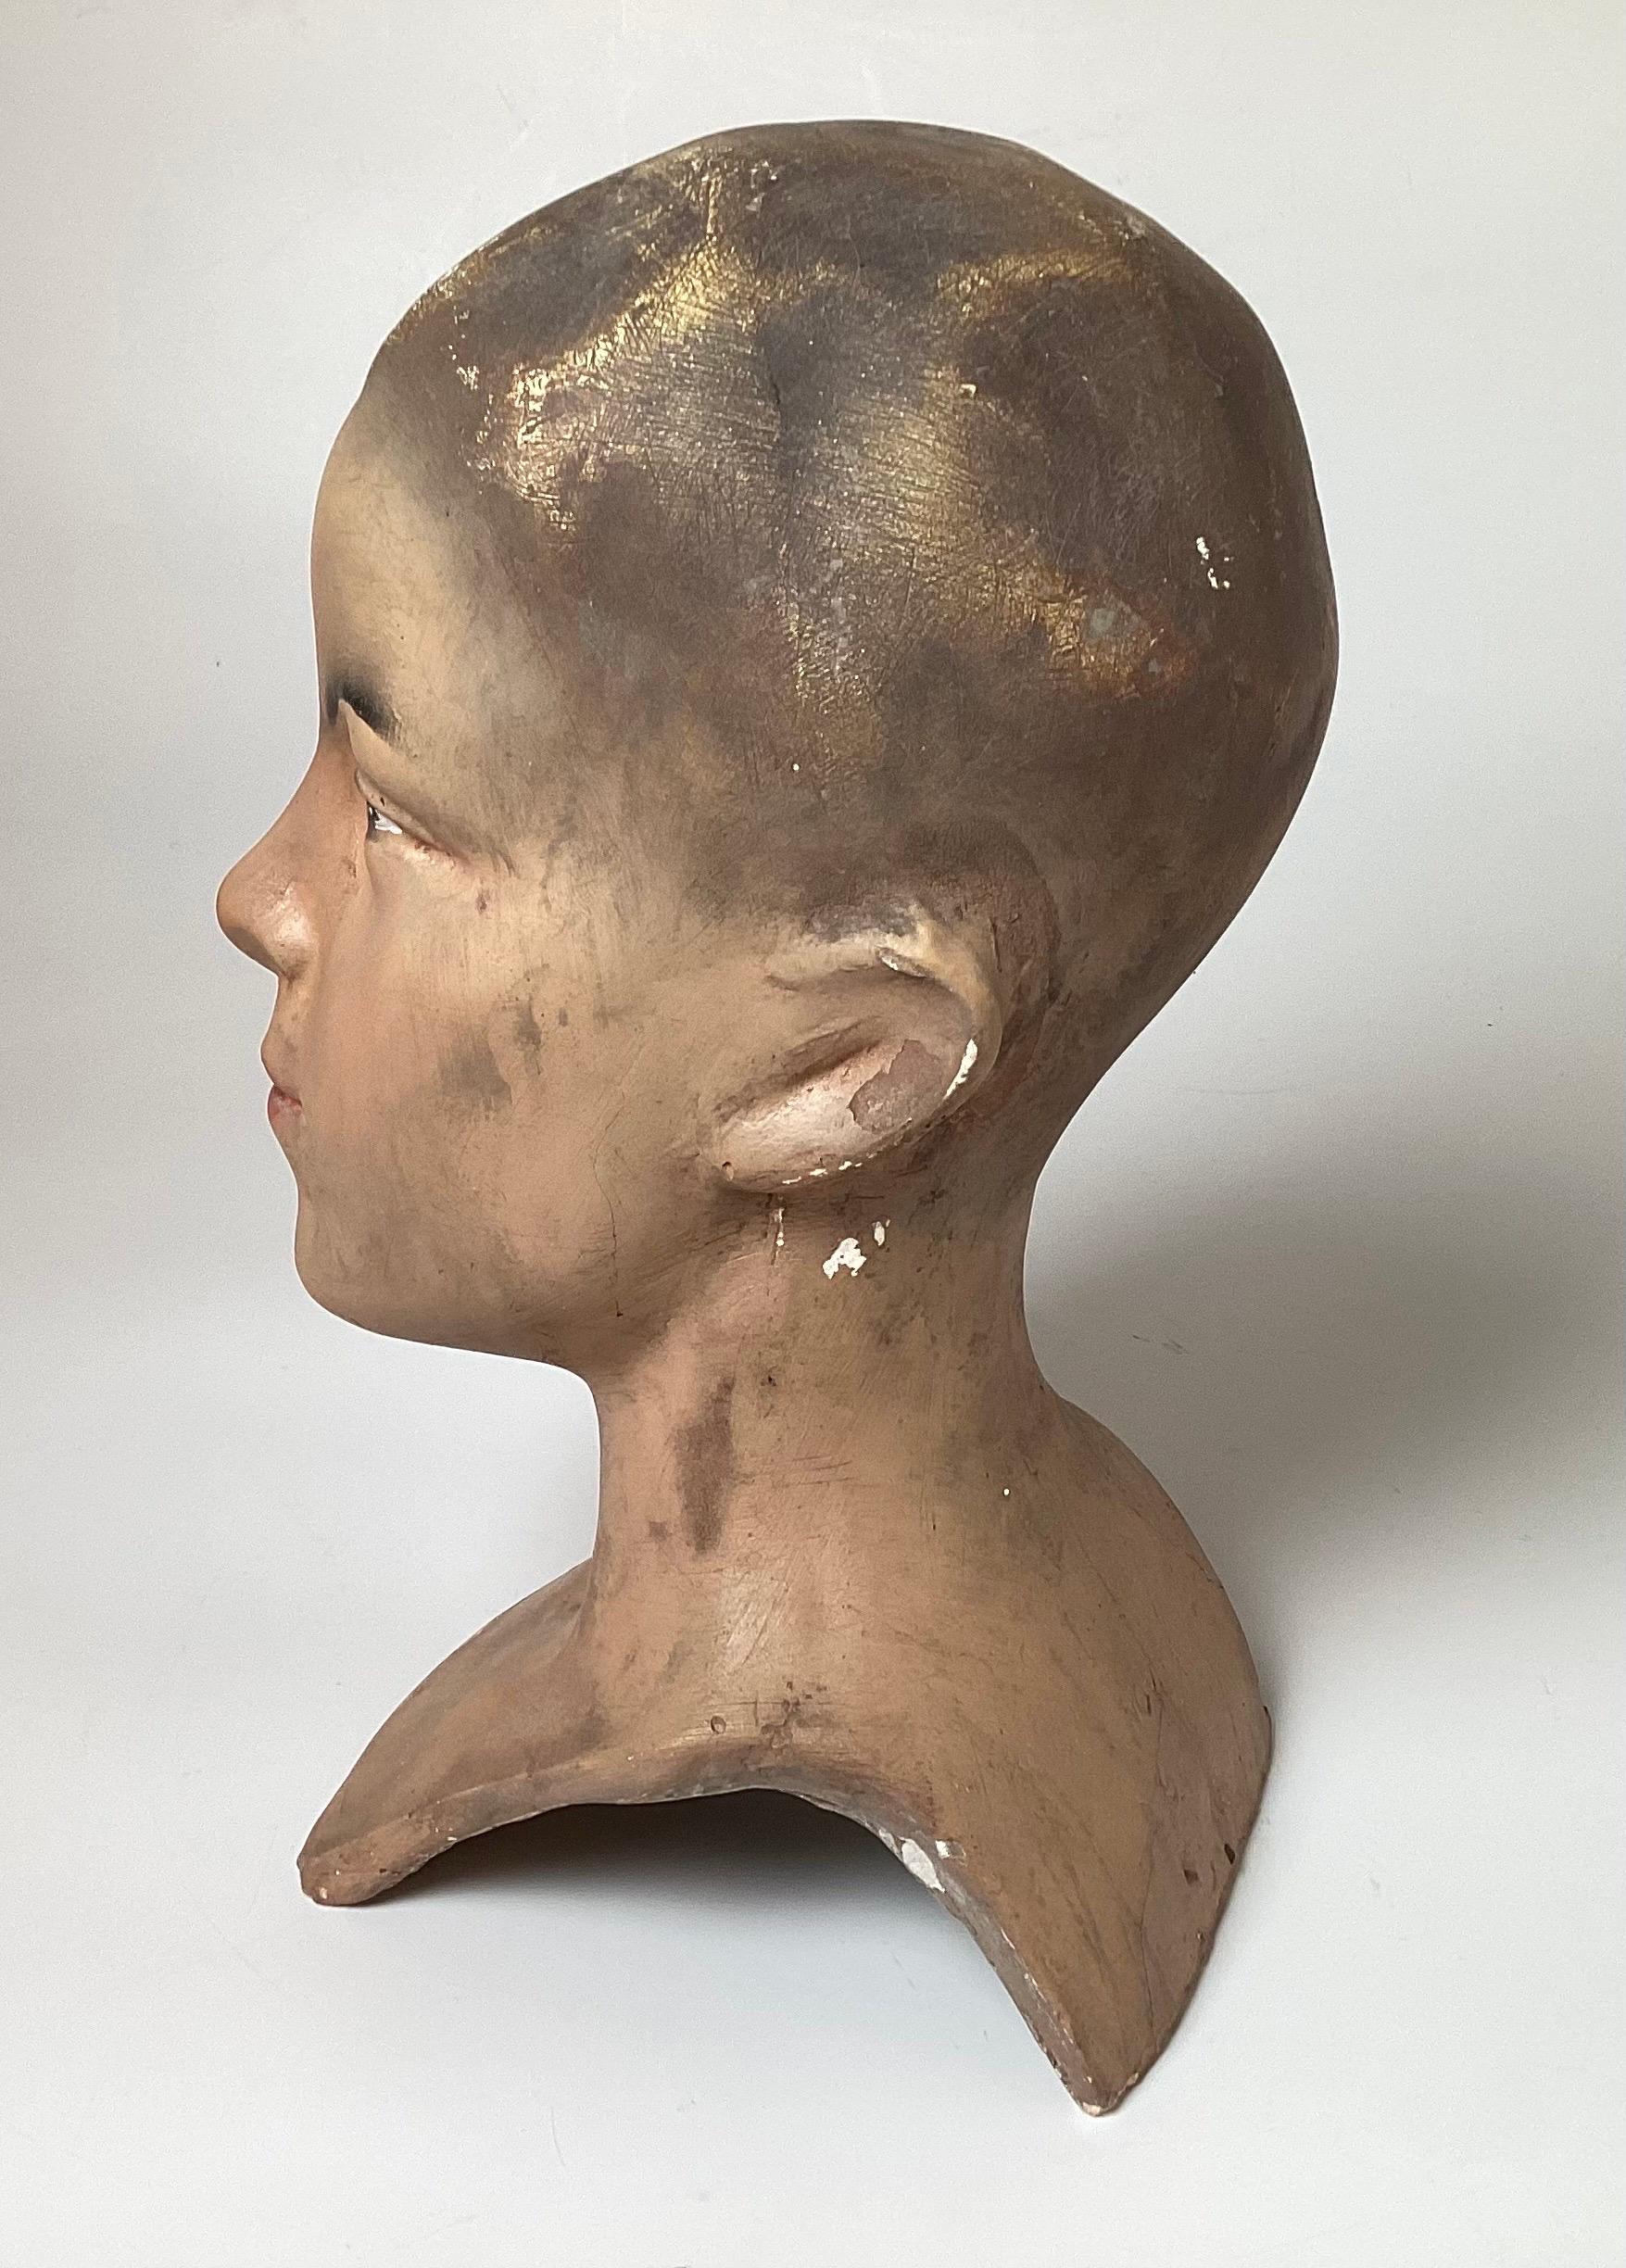 All original plaster mannequin hear from a Belgium department store. The face of a teen aged young man with the original hand panted face and hair, made of a heavy plaster. Europe, 1940s 12 inches tall.